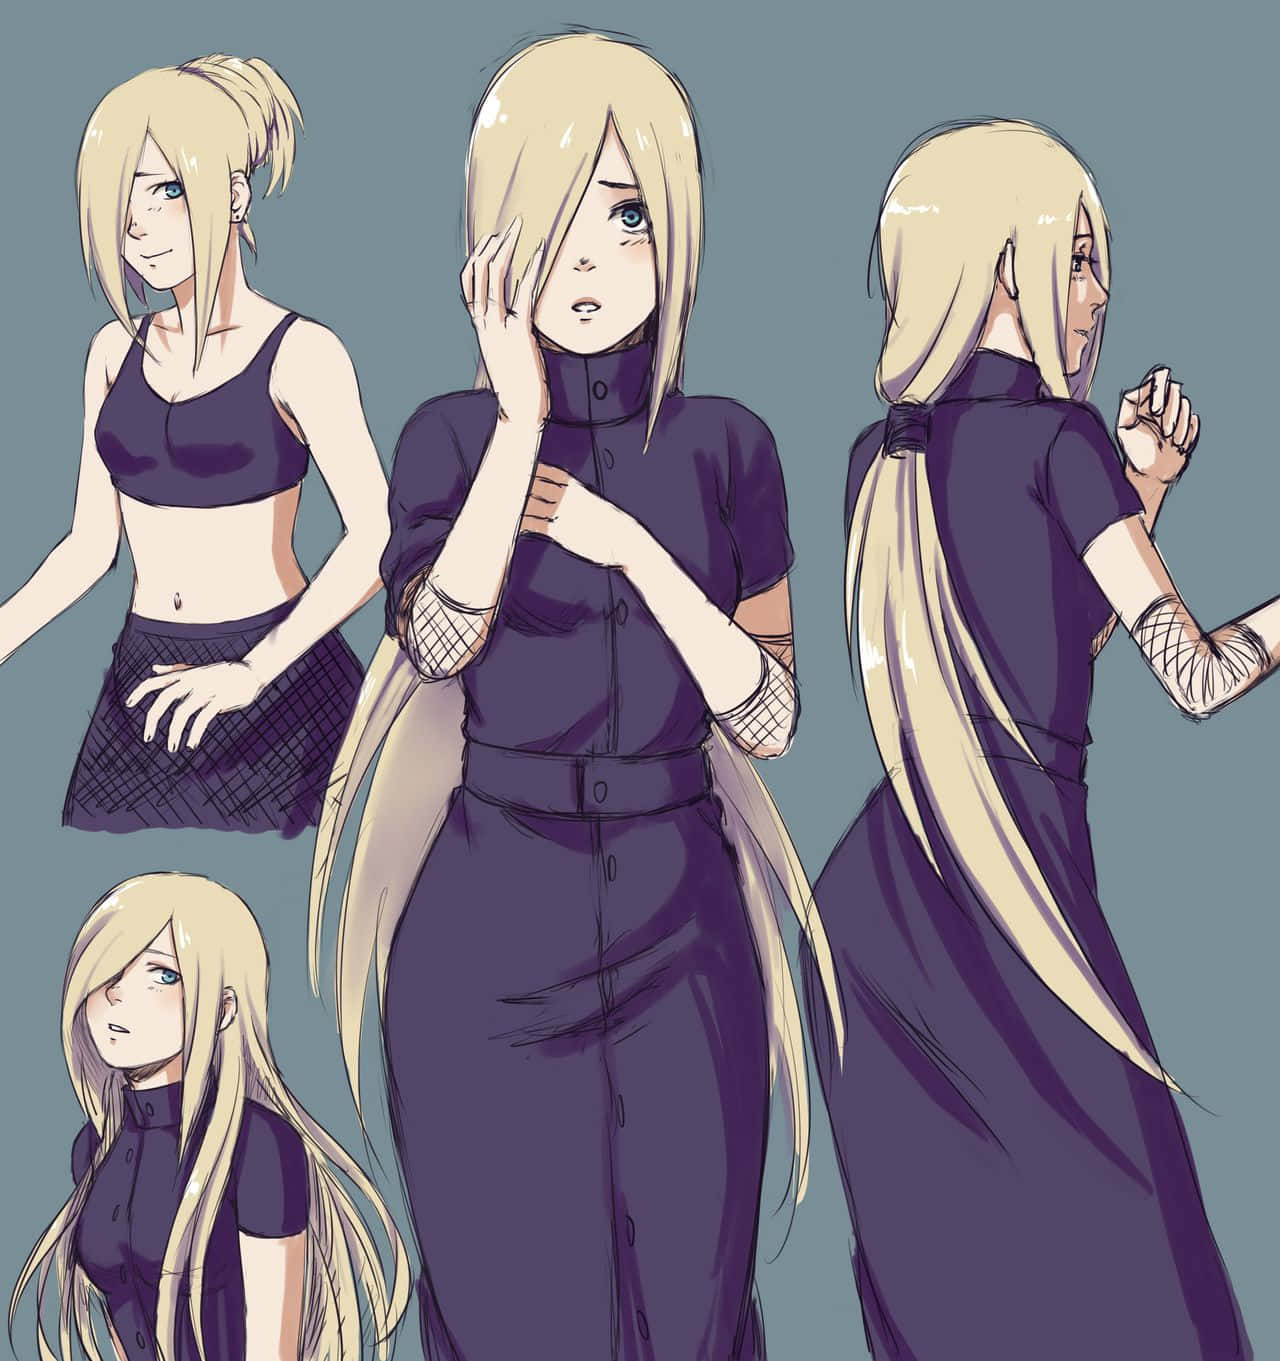 one of cutest anime character 😘 Ino... - Sketching Revolution | Facebook